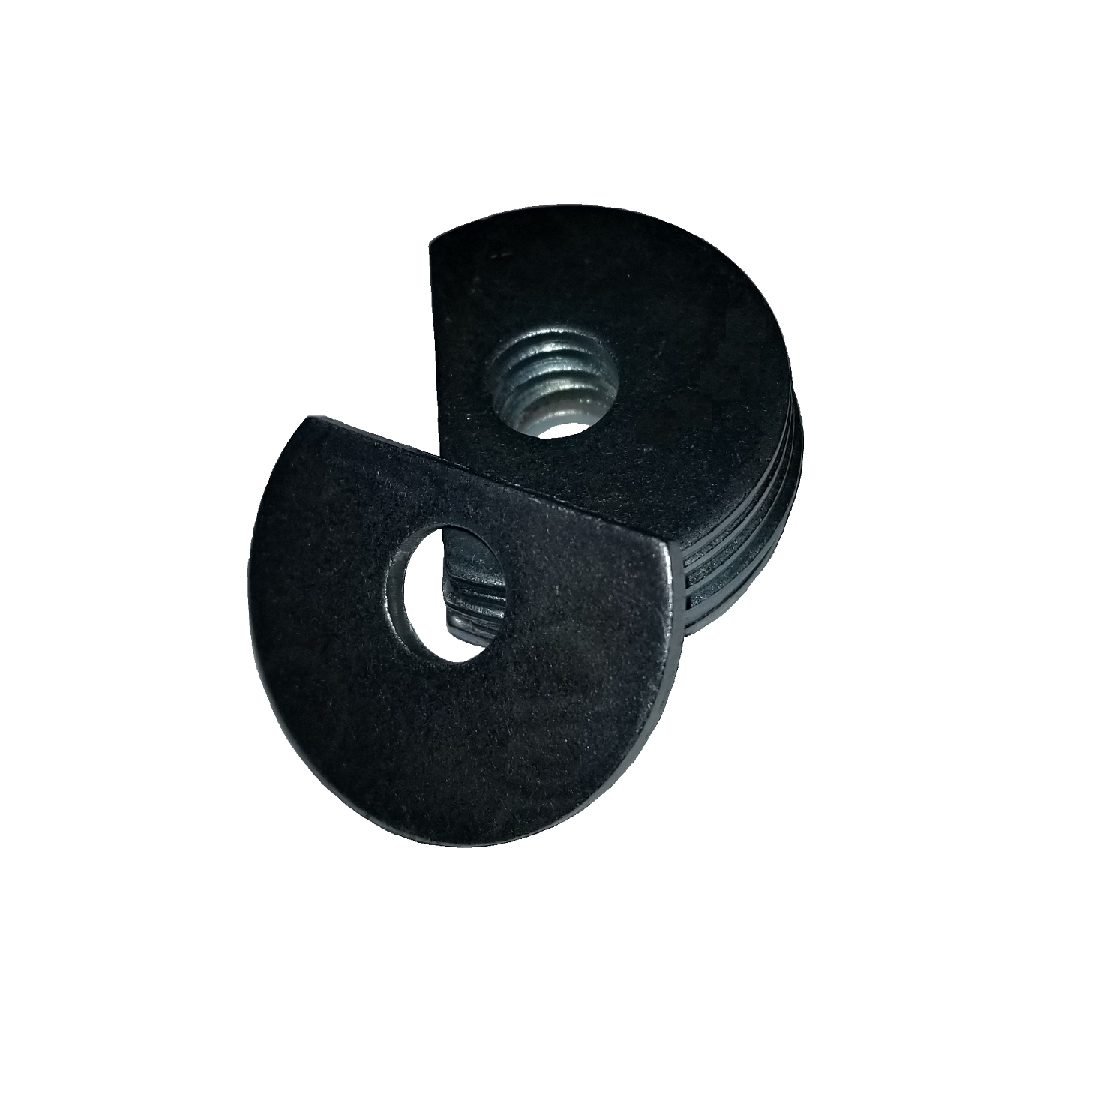 Clipped OD Washer - 0.485 ID, 1.265 OD, 0.194 Thick, Low Carbon Steel - Soft